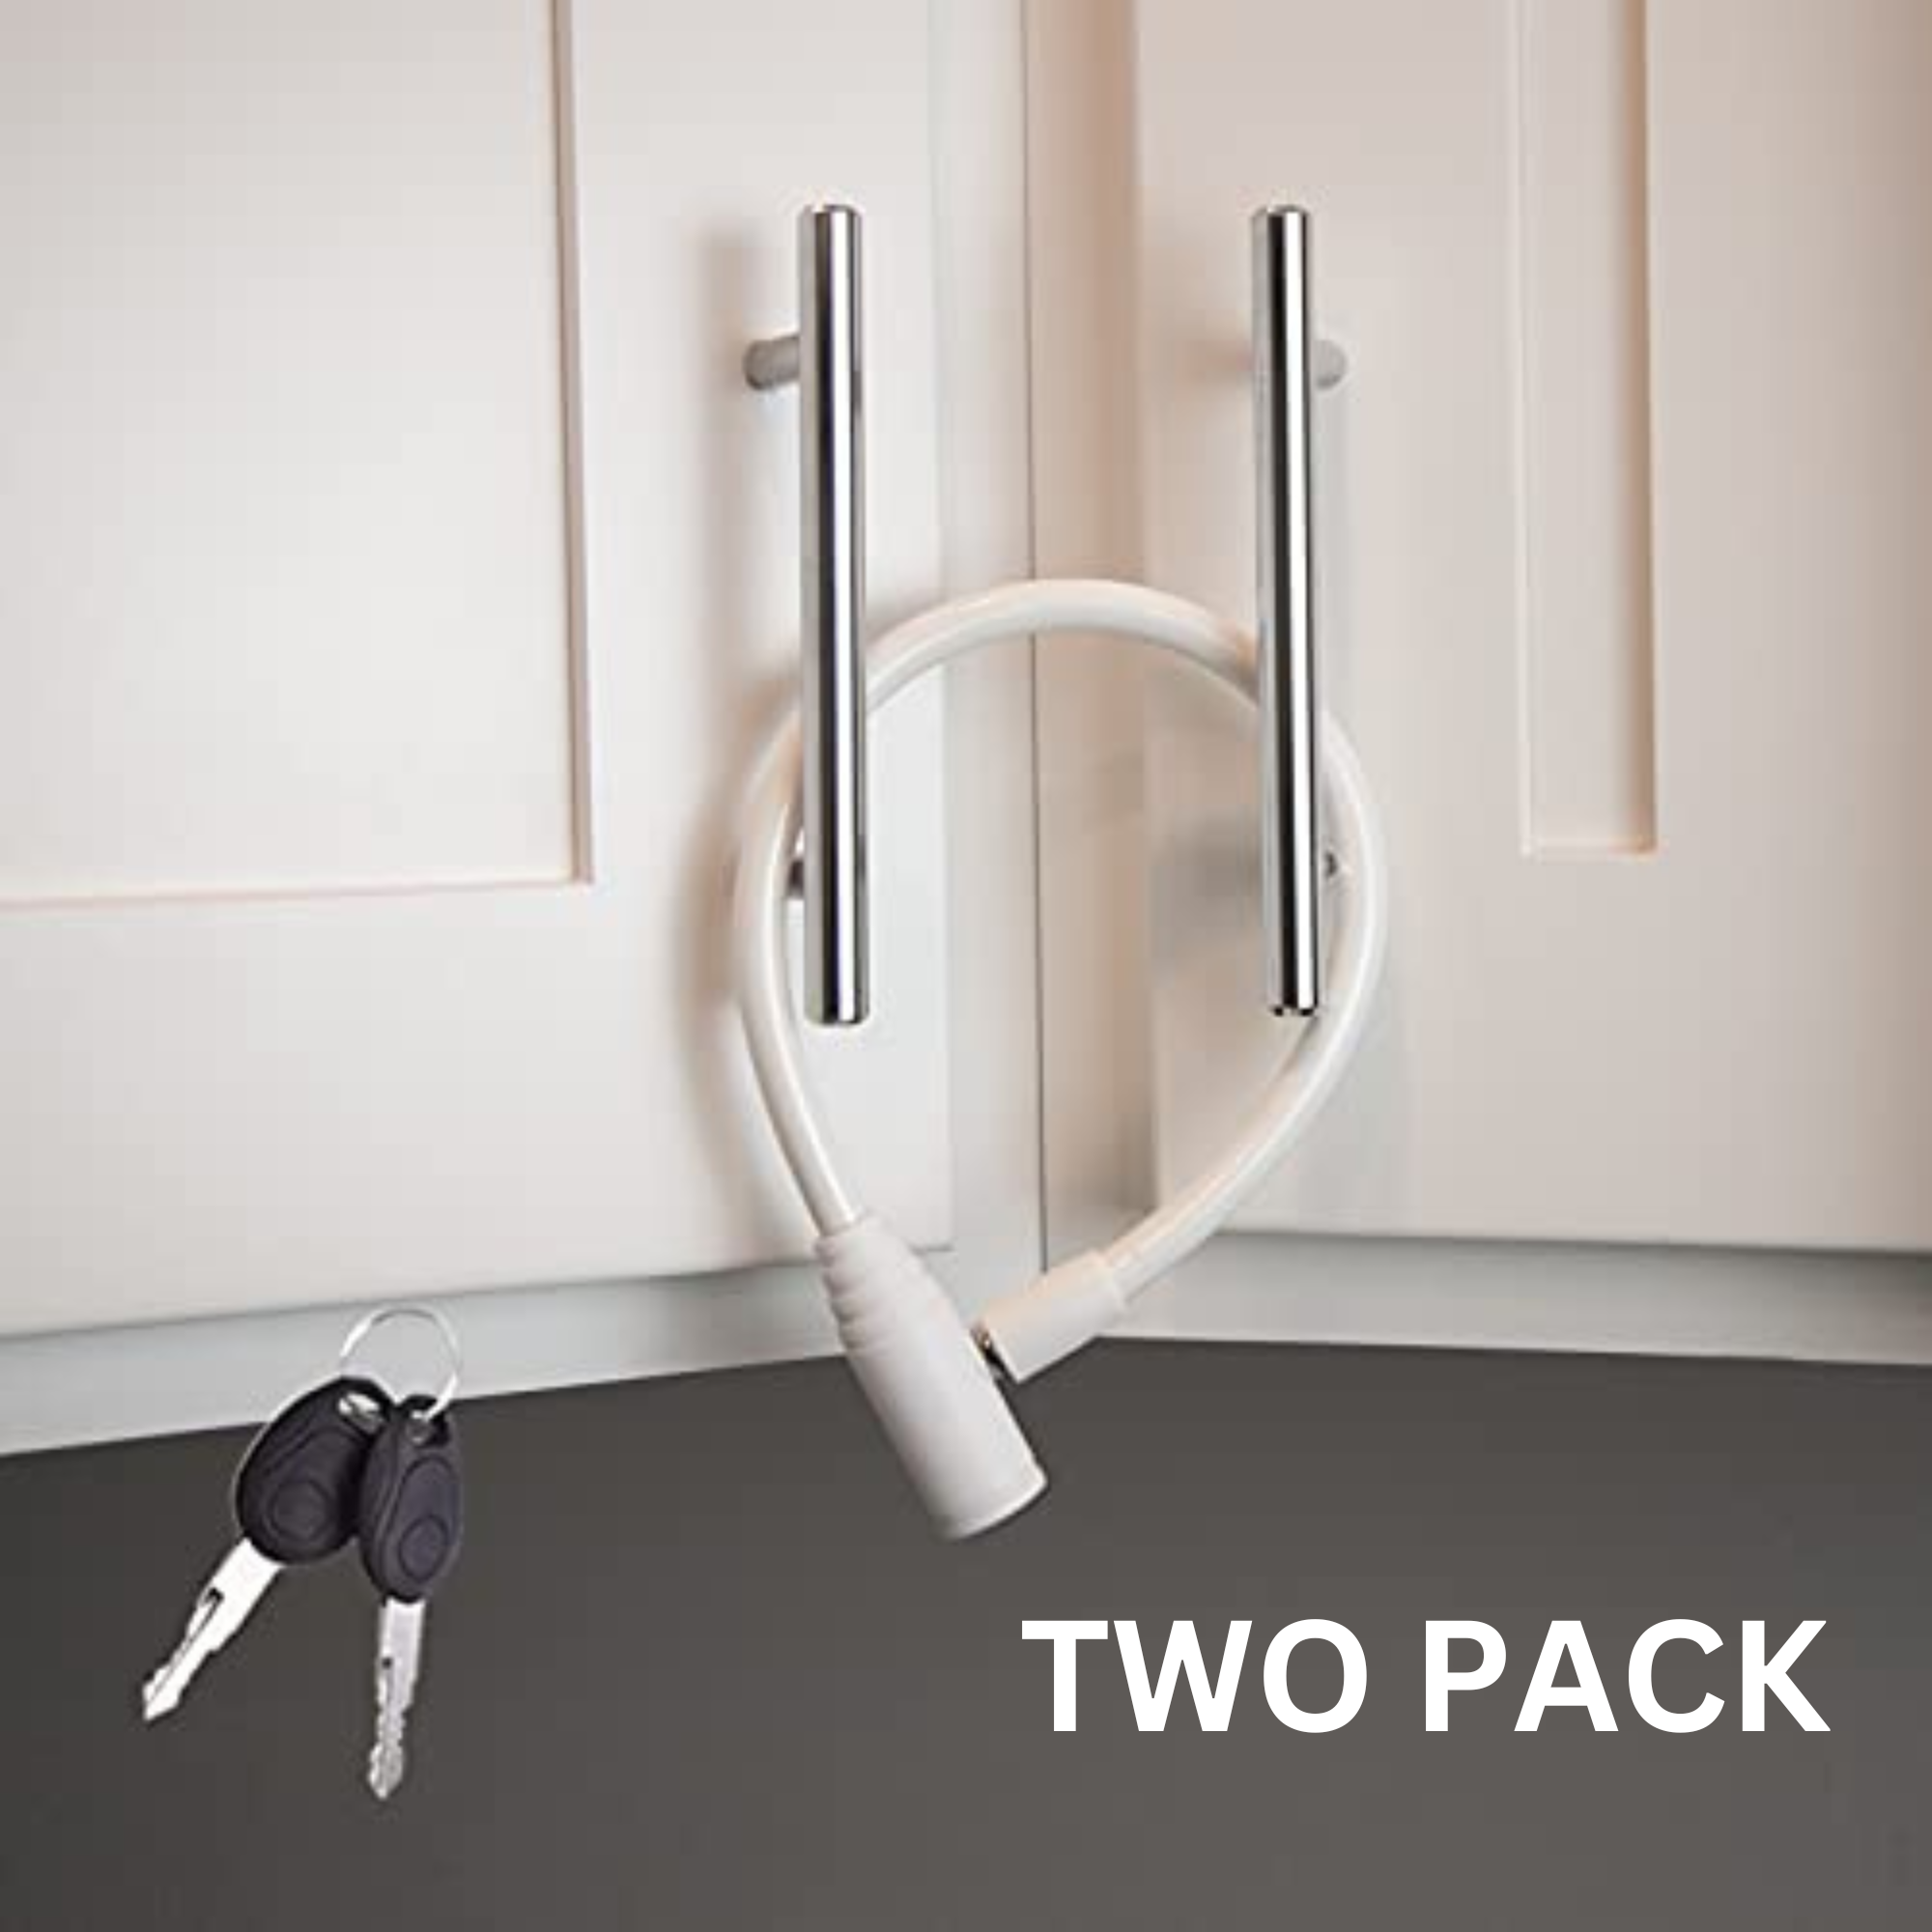 Multi-functional French-door Refrigerator and Cabinet Lock (Long